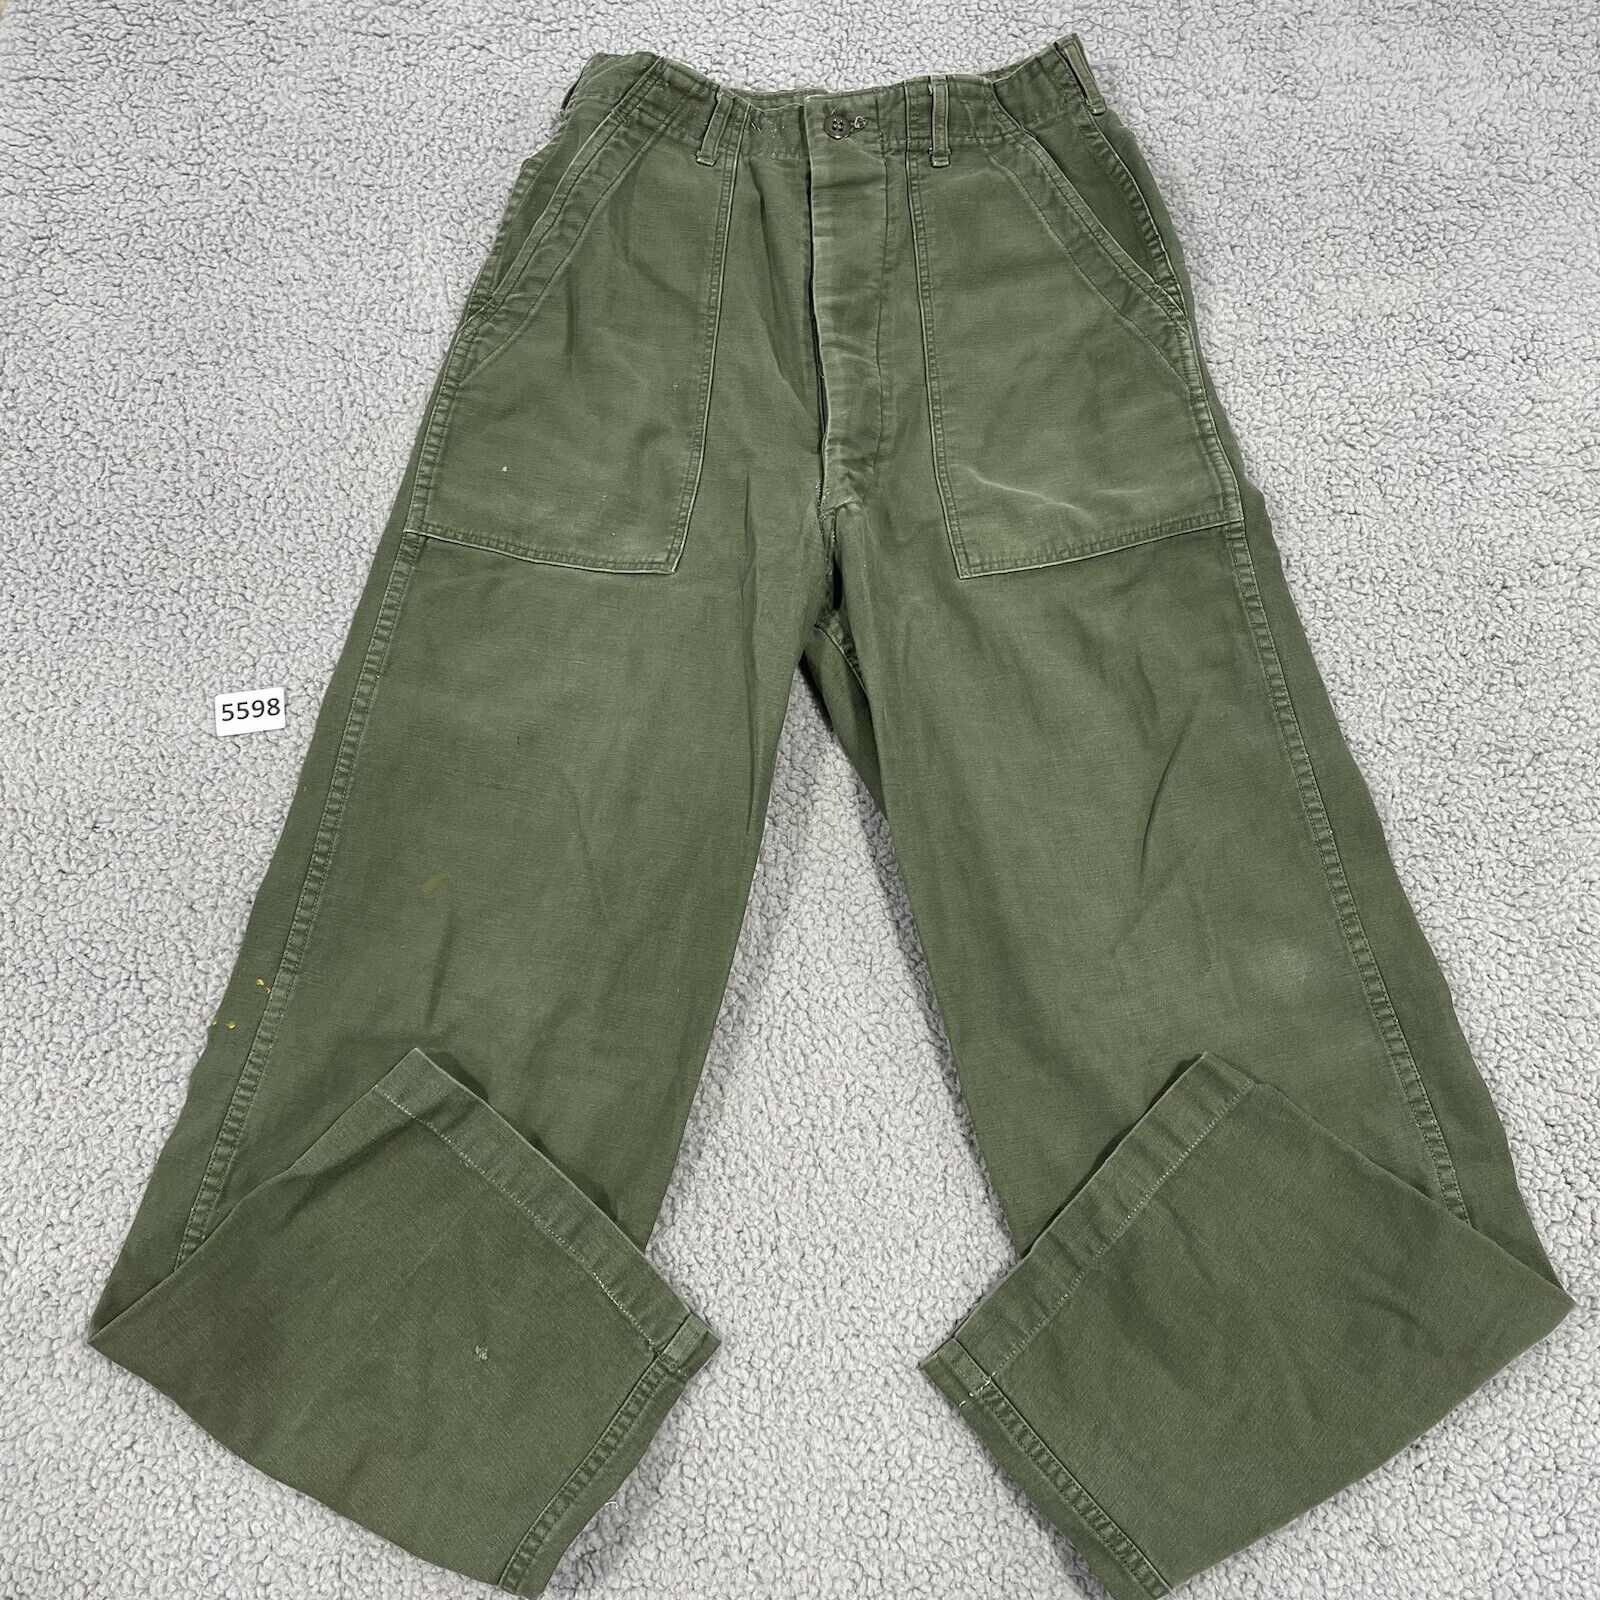 Vintage OG-107 Sateen Utility Pants Size 26 x 29 Military Green Trousers Vietnam